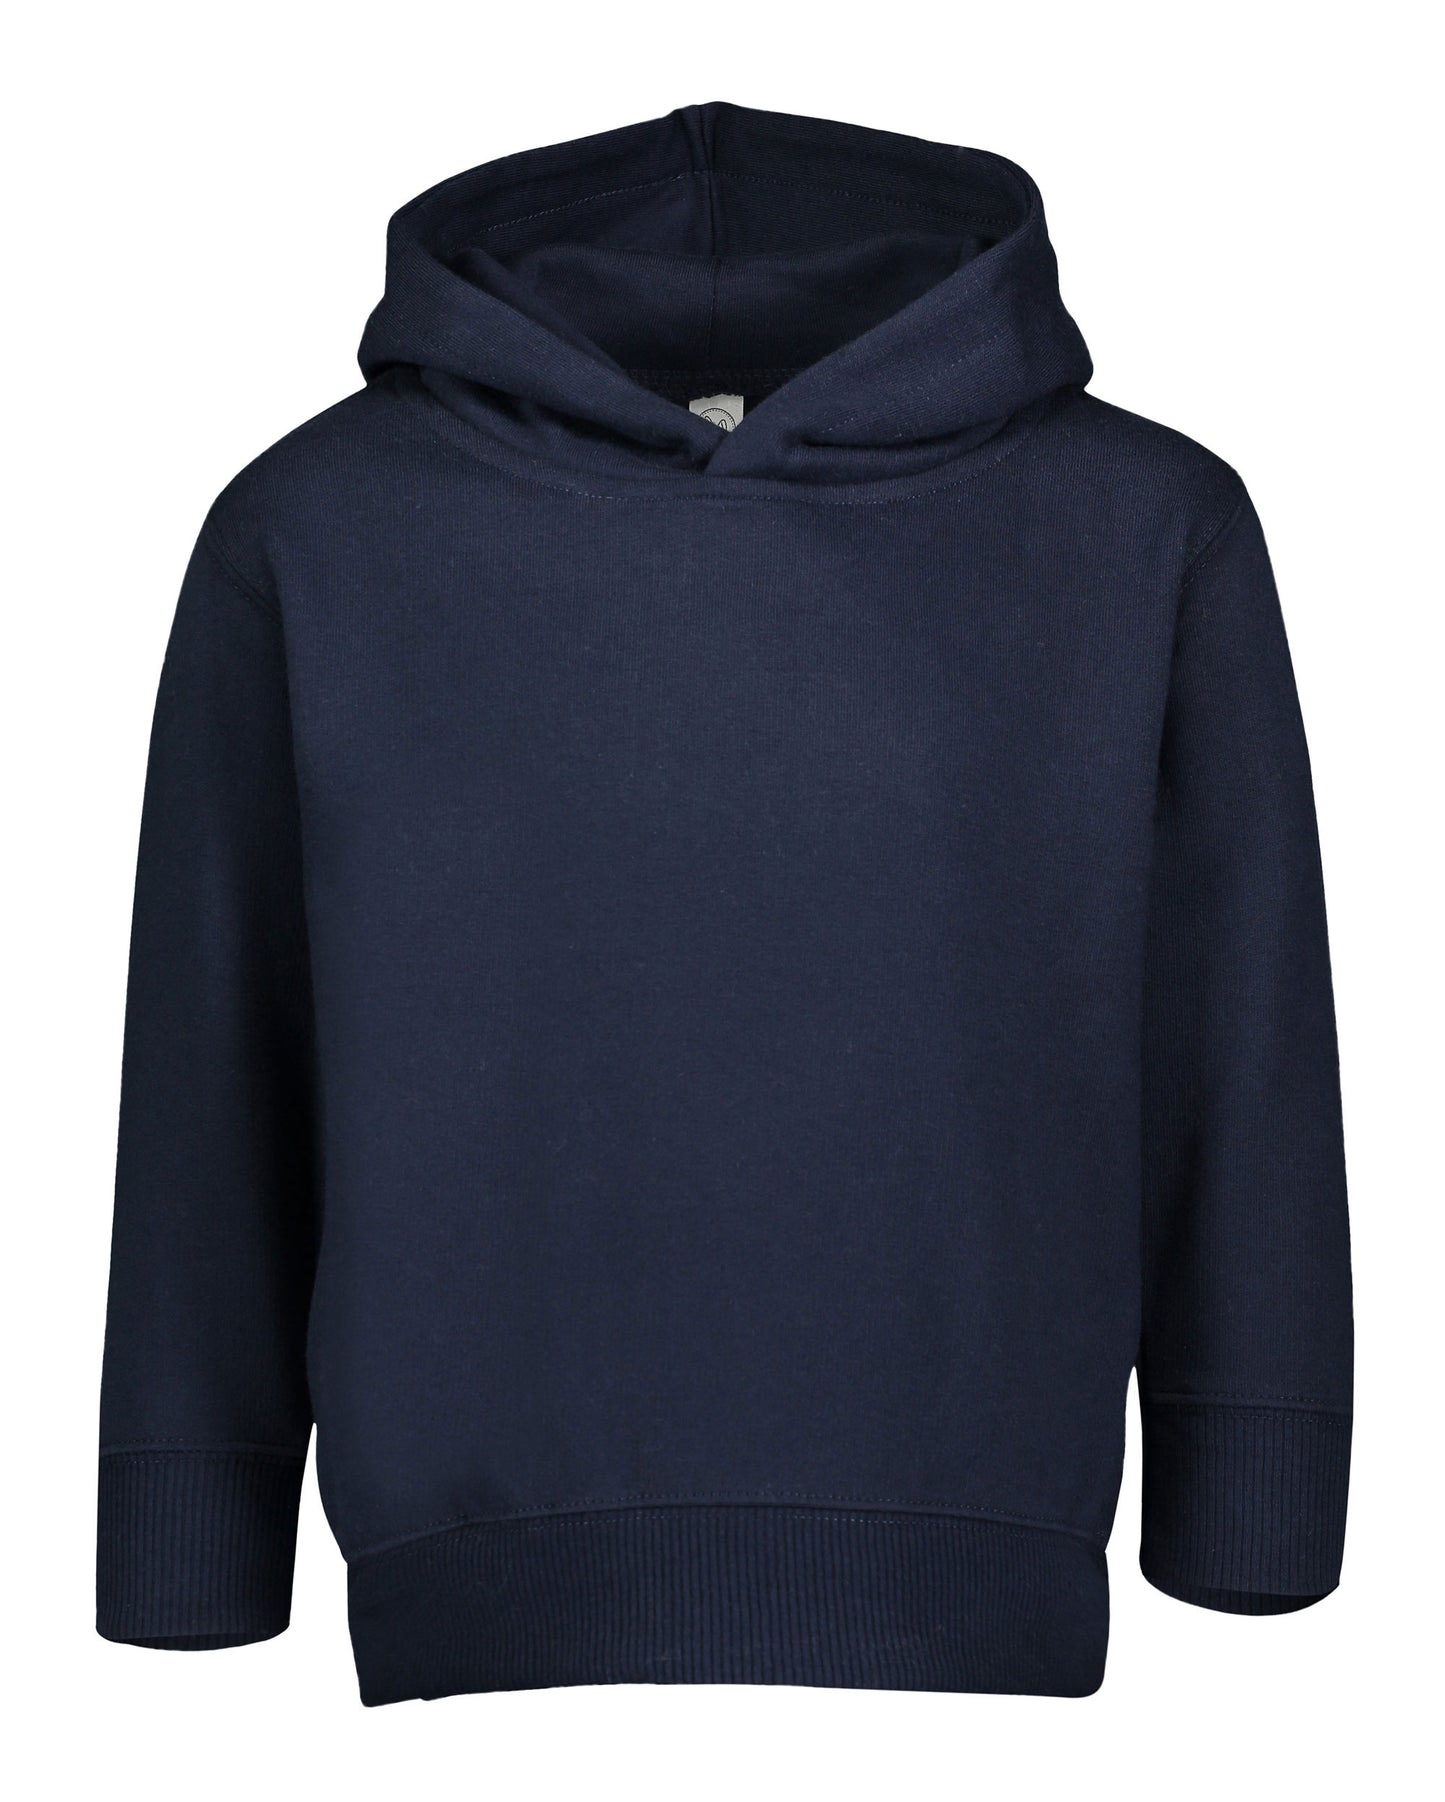 LL Sailboat Toddler Pullover Fleece Hoodie